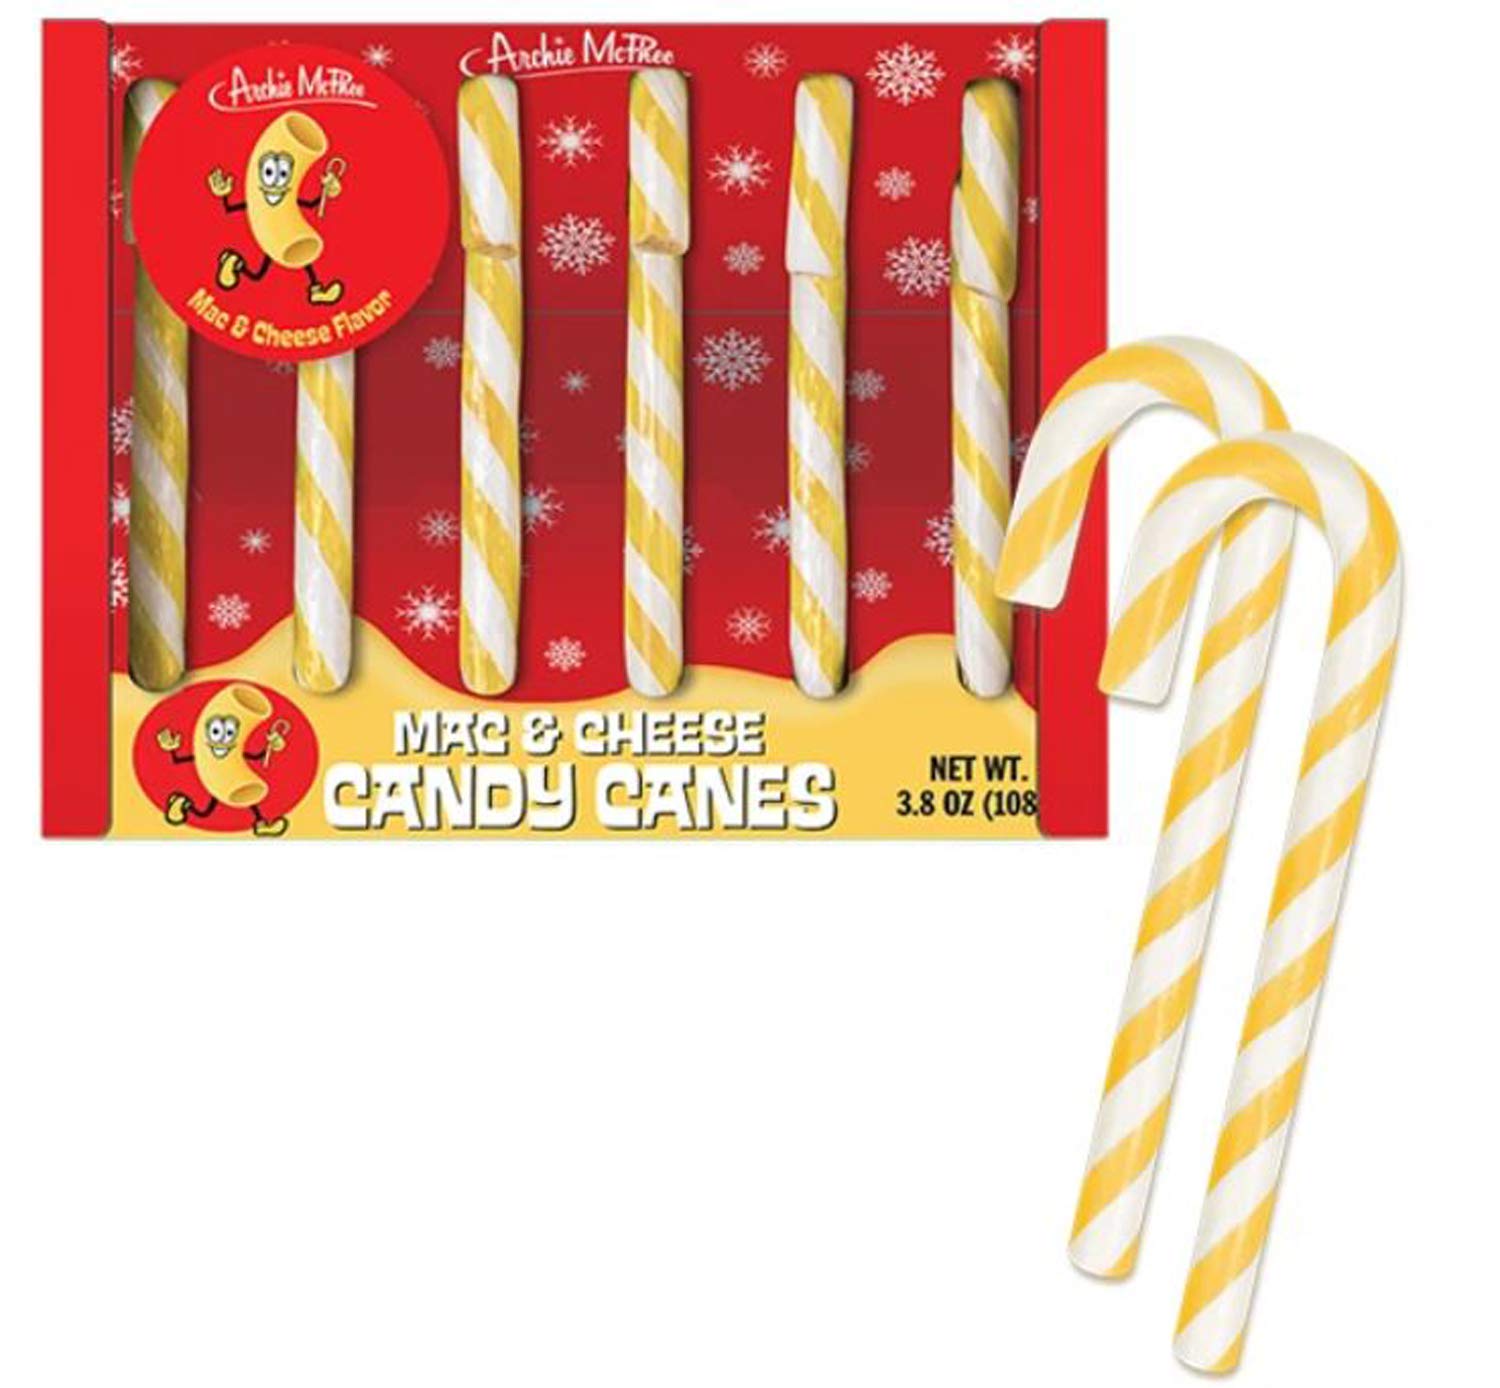 Archie Mcphee Mac And Cheese Candy Canes 3.8 Oz! Six Mac & Cheese Flavored Candy Canes! Yellow And white Stripes Colorful Sweets! Macaroni And Cheese Candies! Choose Your Flavor! (Mac & Cheese)